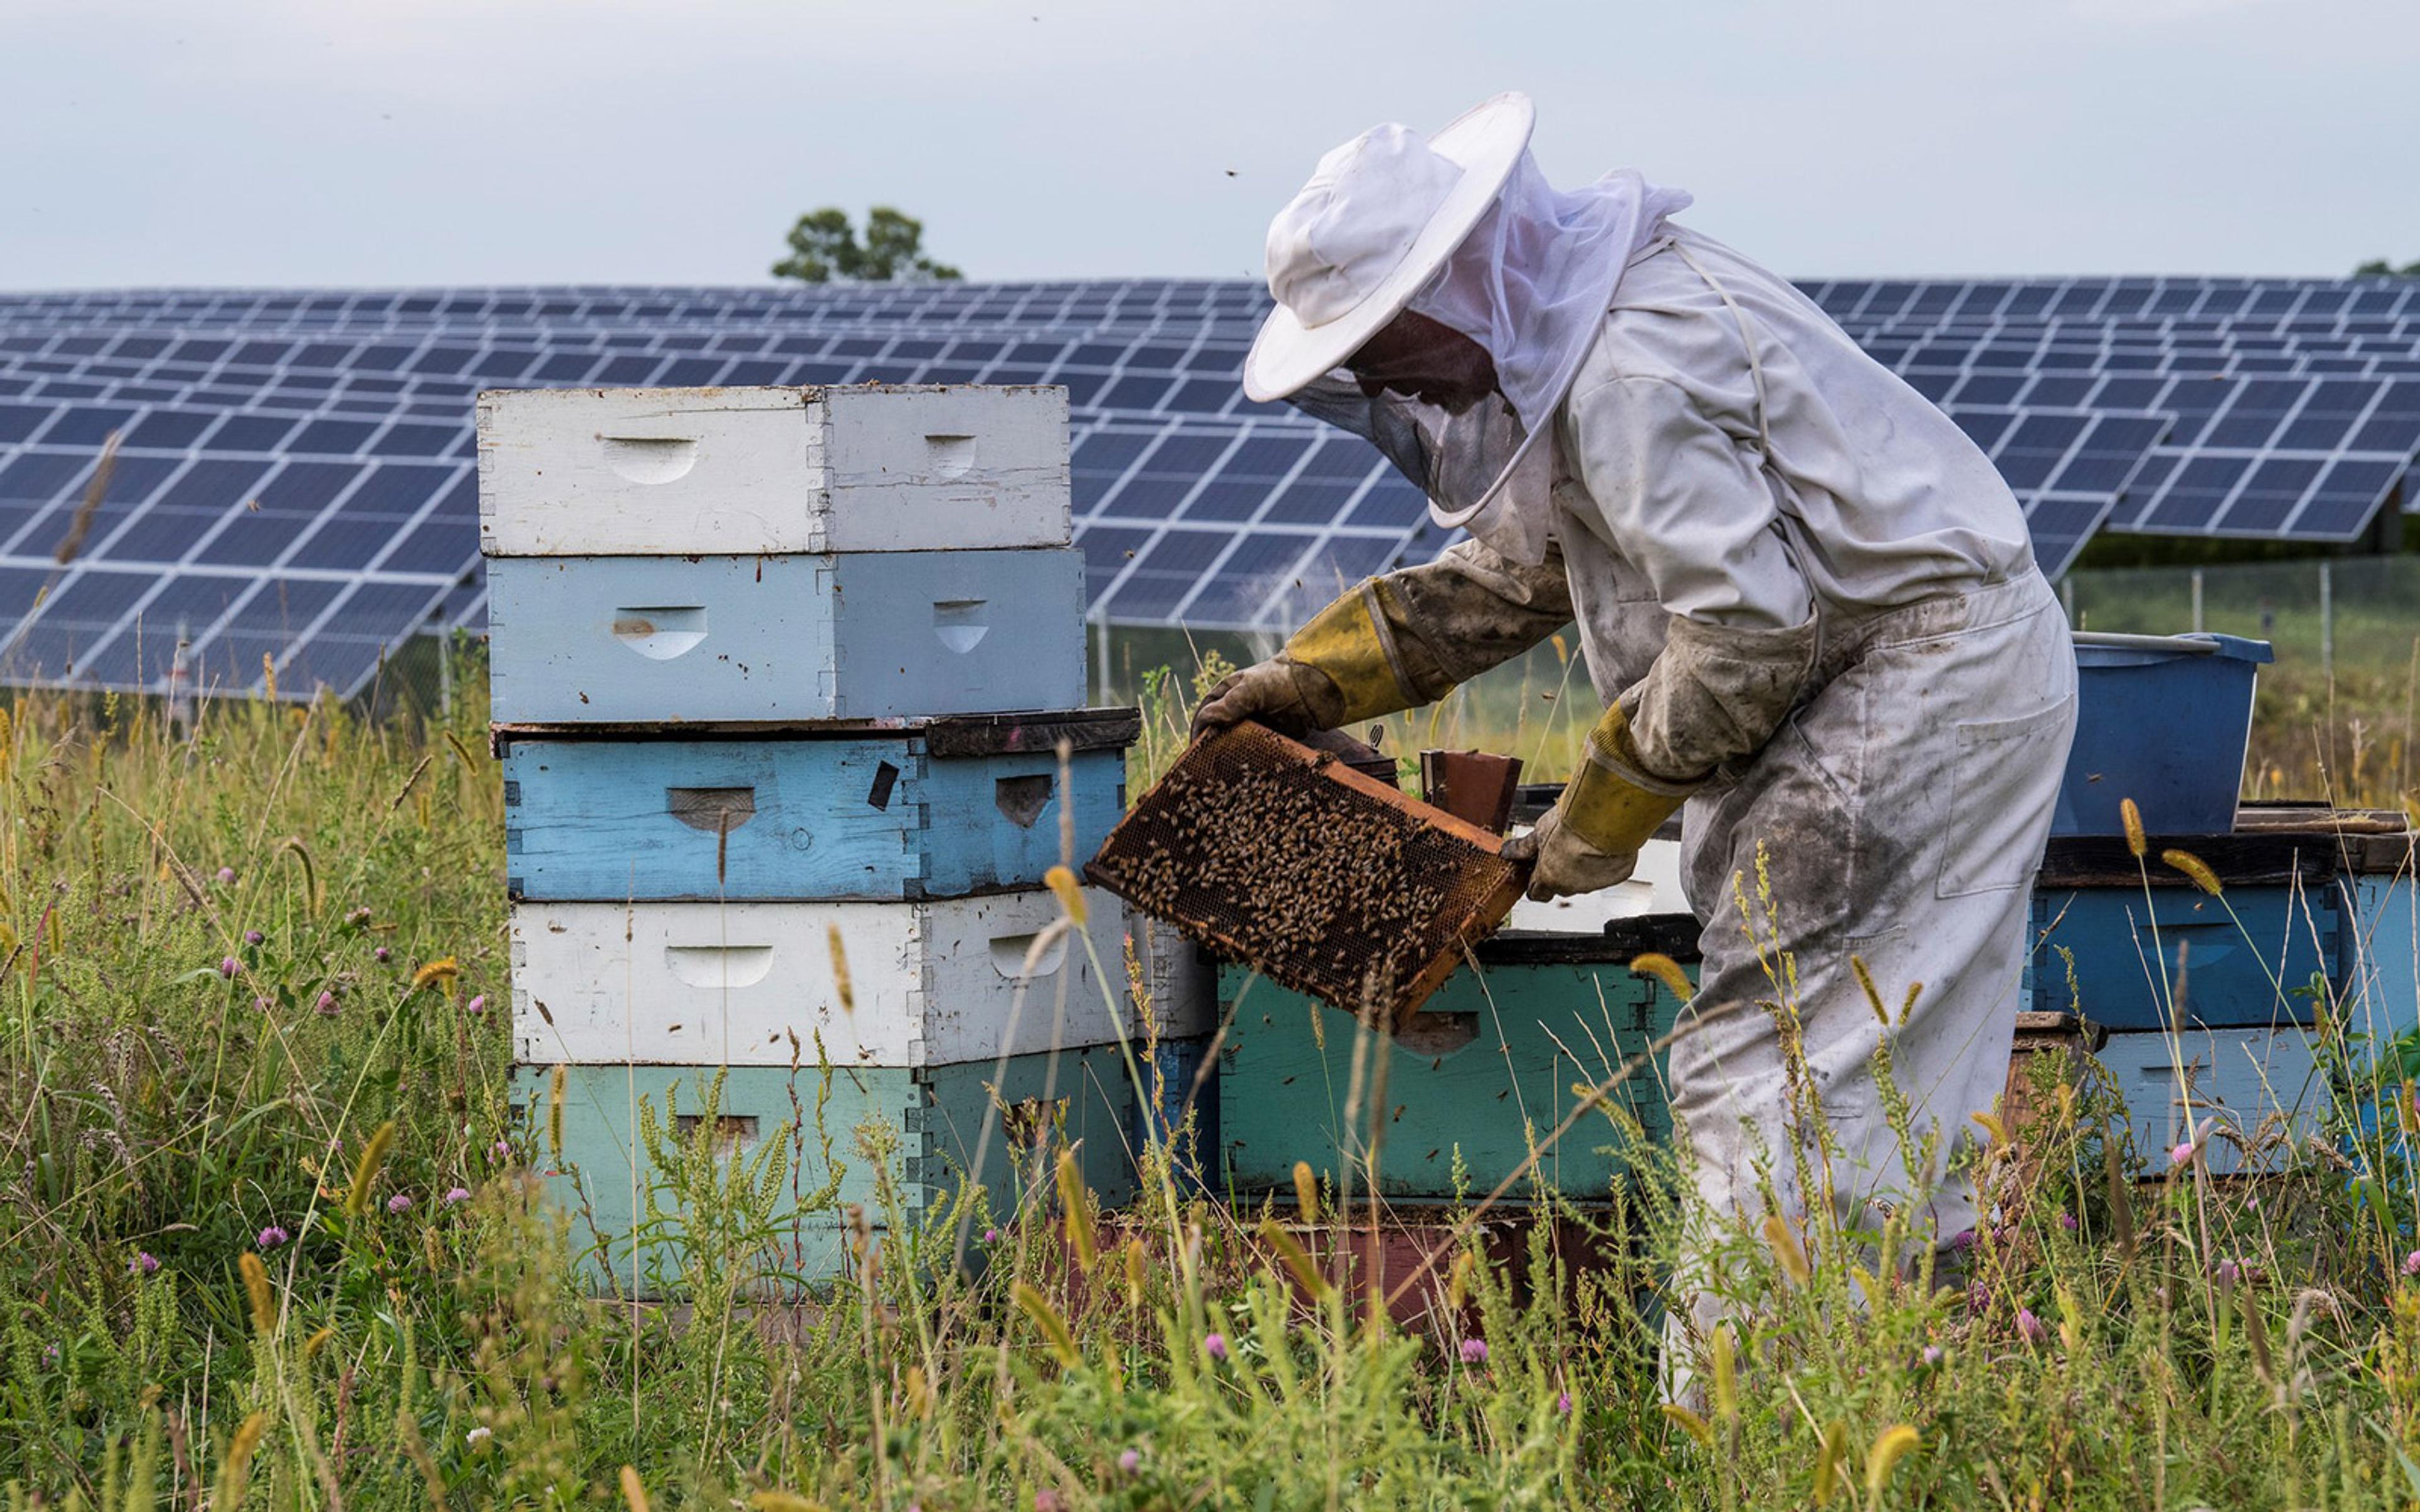 A beekeeper from Bare Honey manages honey bee hives on a pollinator-friendly solar farm.